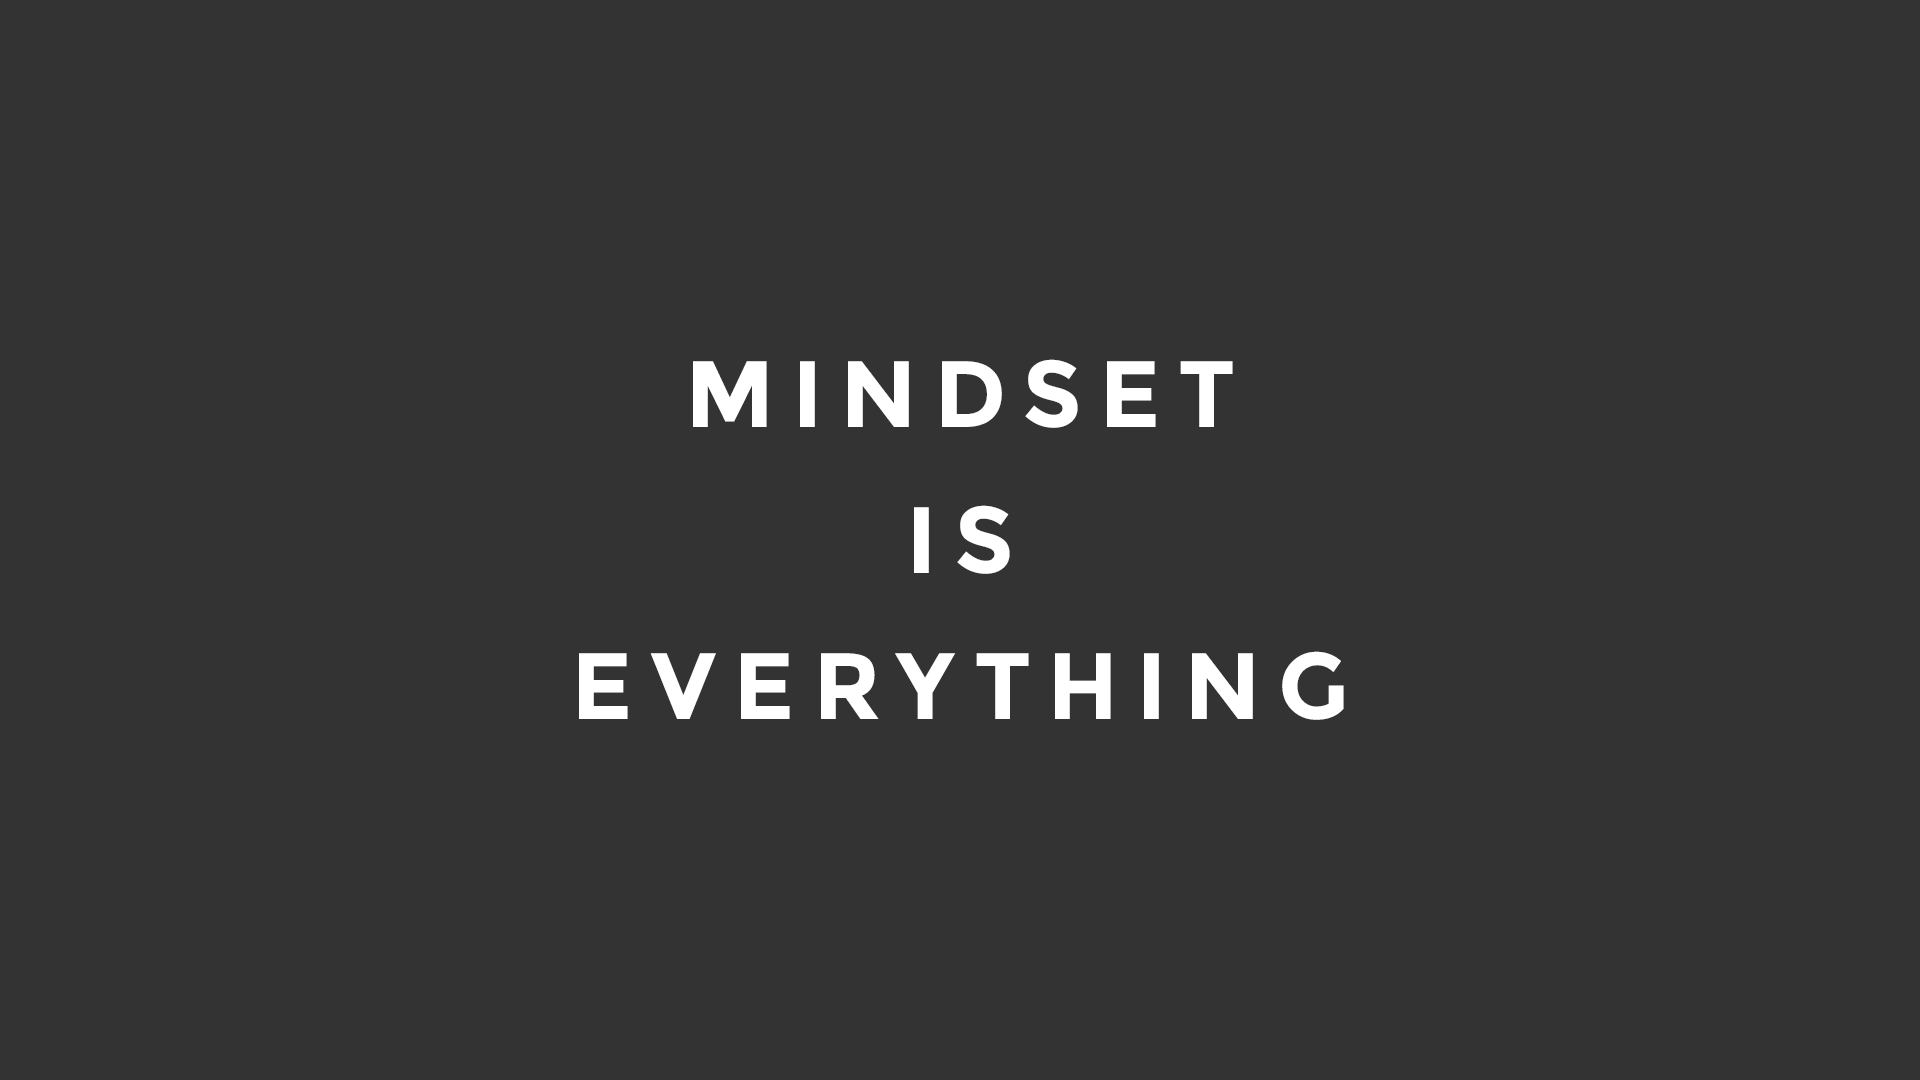 Mindset is everything WITH LESS